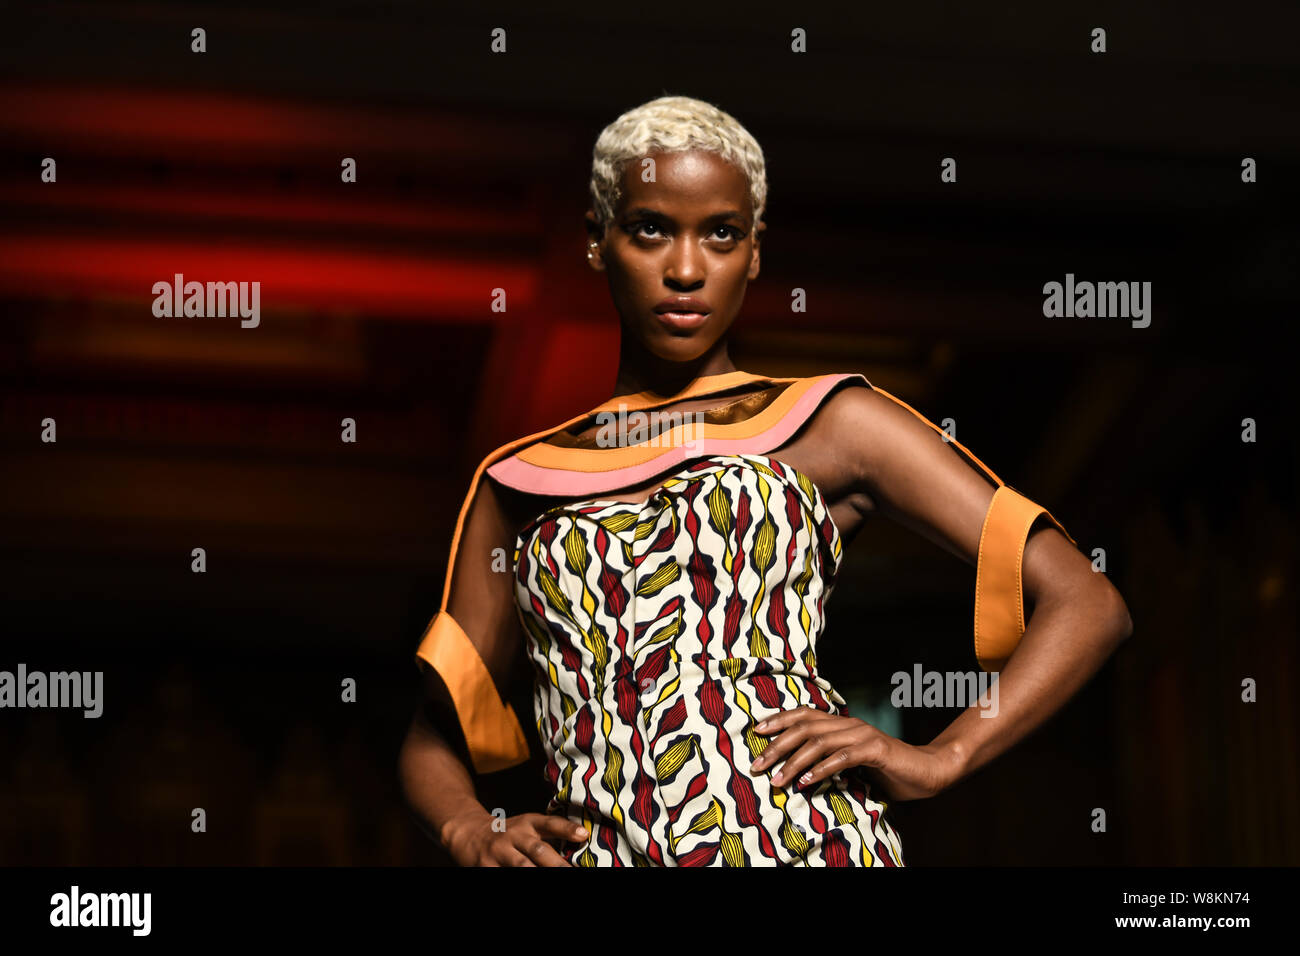 London, UK. 09th Aug, 2019. African Fashion Week London 2019 #AFWL2019 - backstage at Freemasons Hall on 9 August 2019, London, UK. Credit: Picture Capital/Alamy Live News Stock Photo